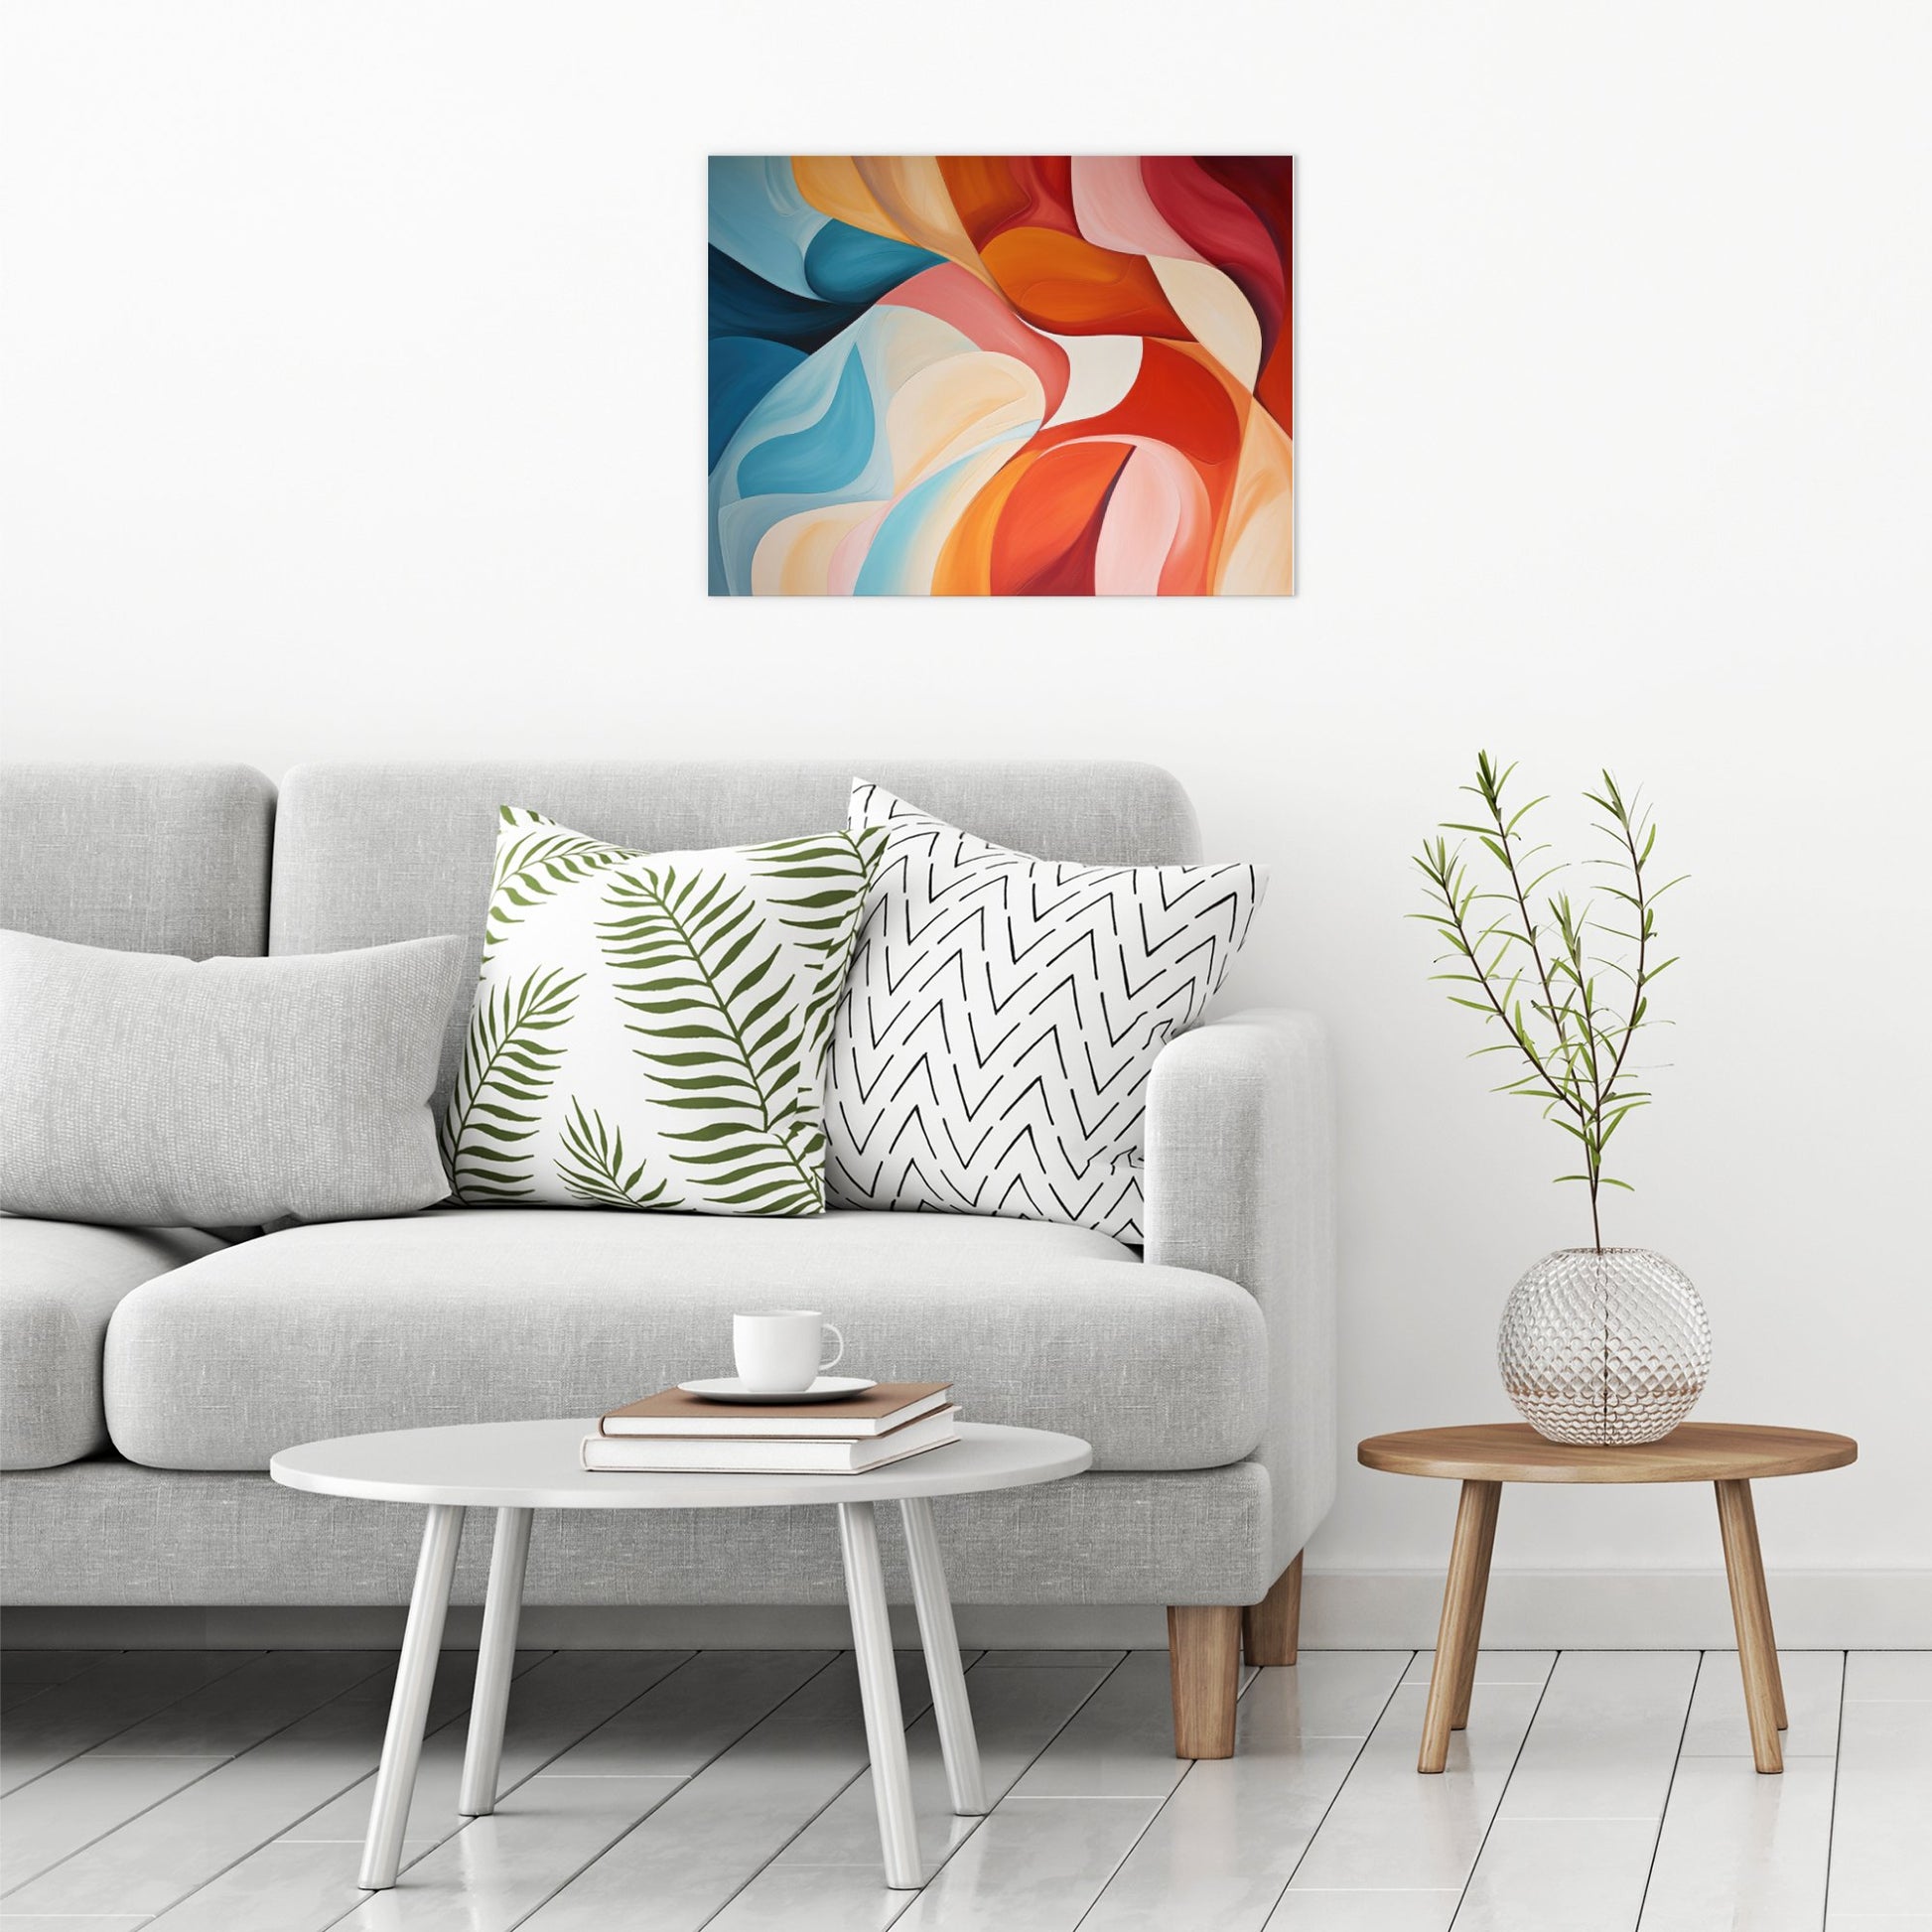 A contemporary modern room view showing a large size metal art poster display plate with printed design of a Turbulence Abstract Painting